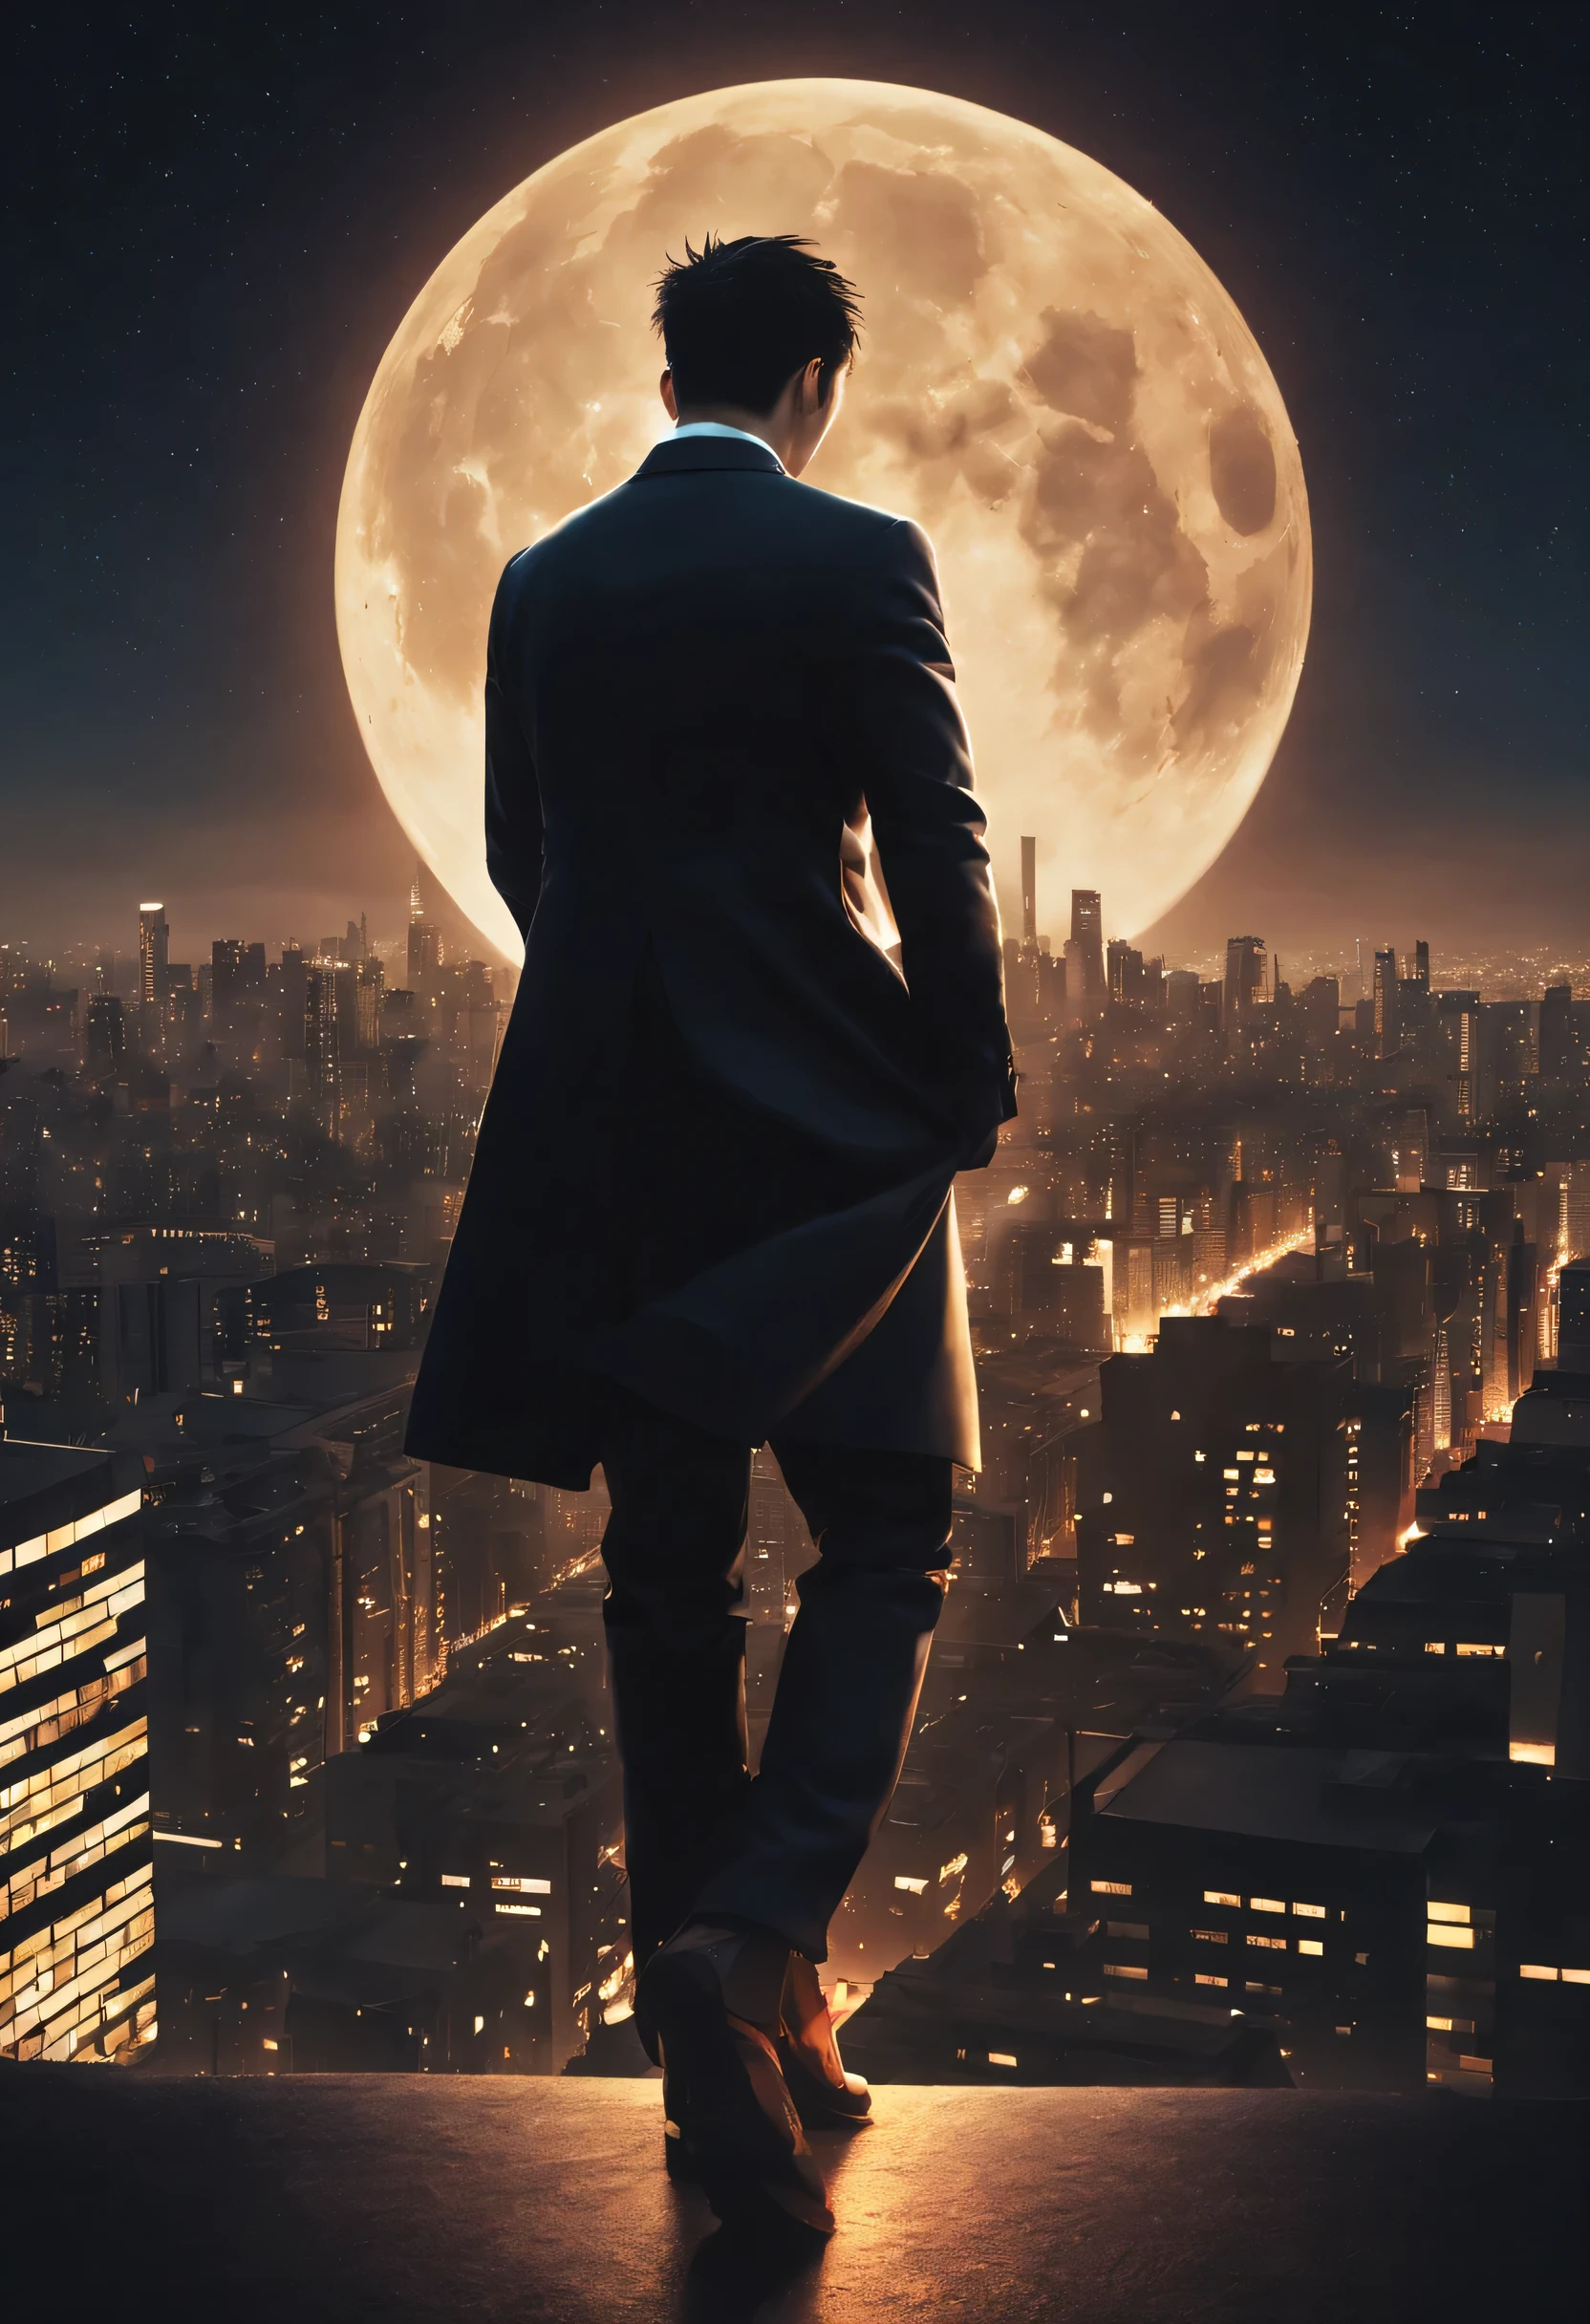 Album cover design instructions:

1. **basic background**: Blur the night view of the city. car lights, Twinkling buildings, urban demolition, The rising moon in the distance forms the background. 

2. **centered image**: one character(heroine)This is standing with your back to the body. His shoulders seemed a little heavy, but, There are shining stars above his head, It gives the impression of a subtle shine.

3. **Bottom picture**: Down at the feet of the characters, A broken clock and broken hourglass can be seen., It symbolizes the passage of time and the responsibilities that come with it.

4. **Title and artist name**: The top of the album has a large "My time" affix title. Down, The artist's name appears subtly.

5. **Text design**: "Woo hoo" The lyrics of this section are very small between the background buildings, It is designed to sparkle like light. 

6. **Farbe**: The overall Farbe of the album adds a bit of a retro tone, Create a melancholic and warm feeling.

The cover of this album talks about the difficulties and responsibilities of life, and expressed the importance of that period,, With the city night view as the background, It conveys information about the value of one&#39;s time and when to.